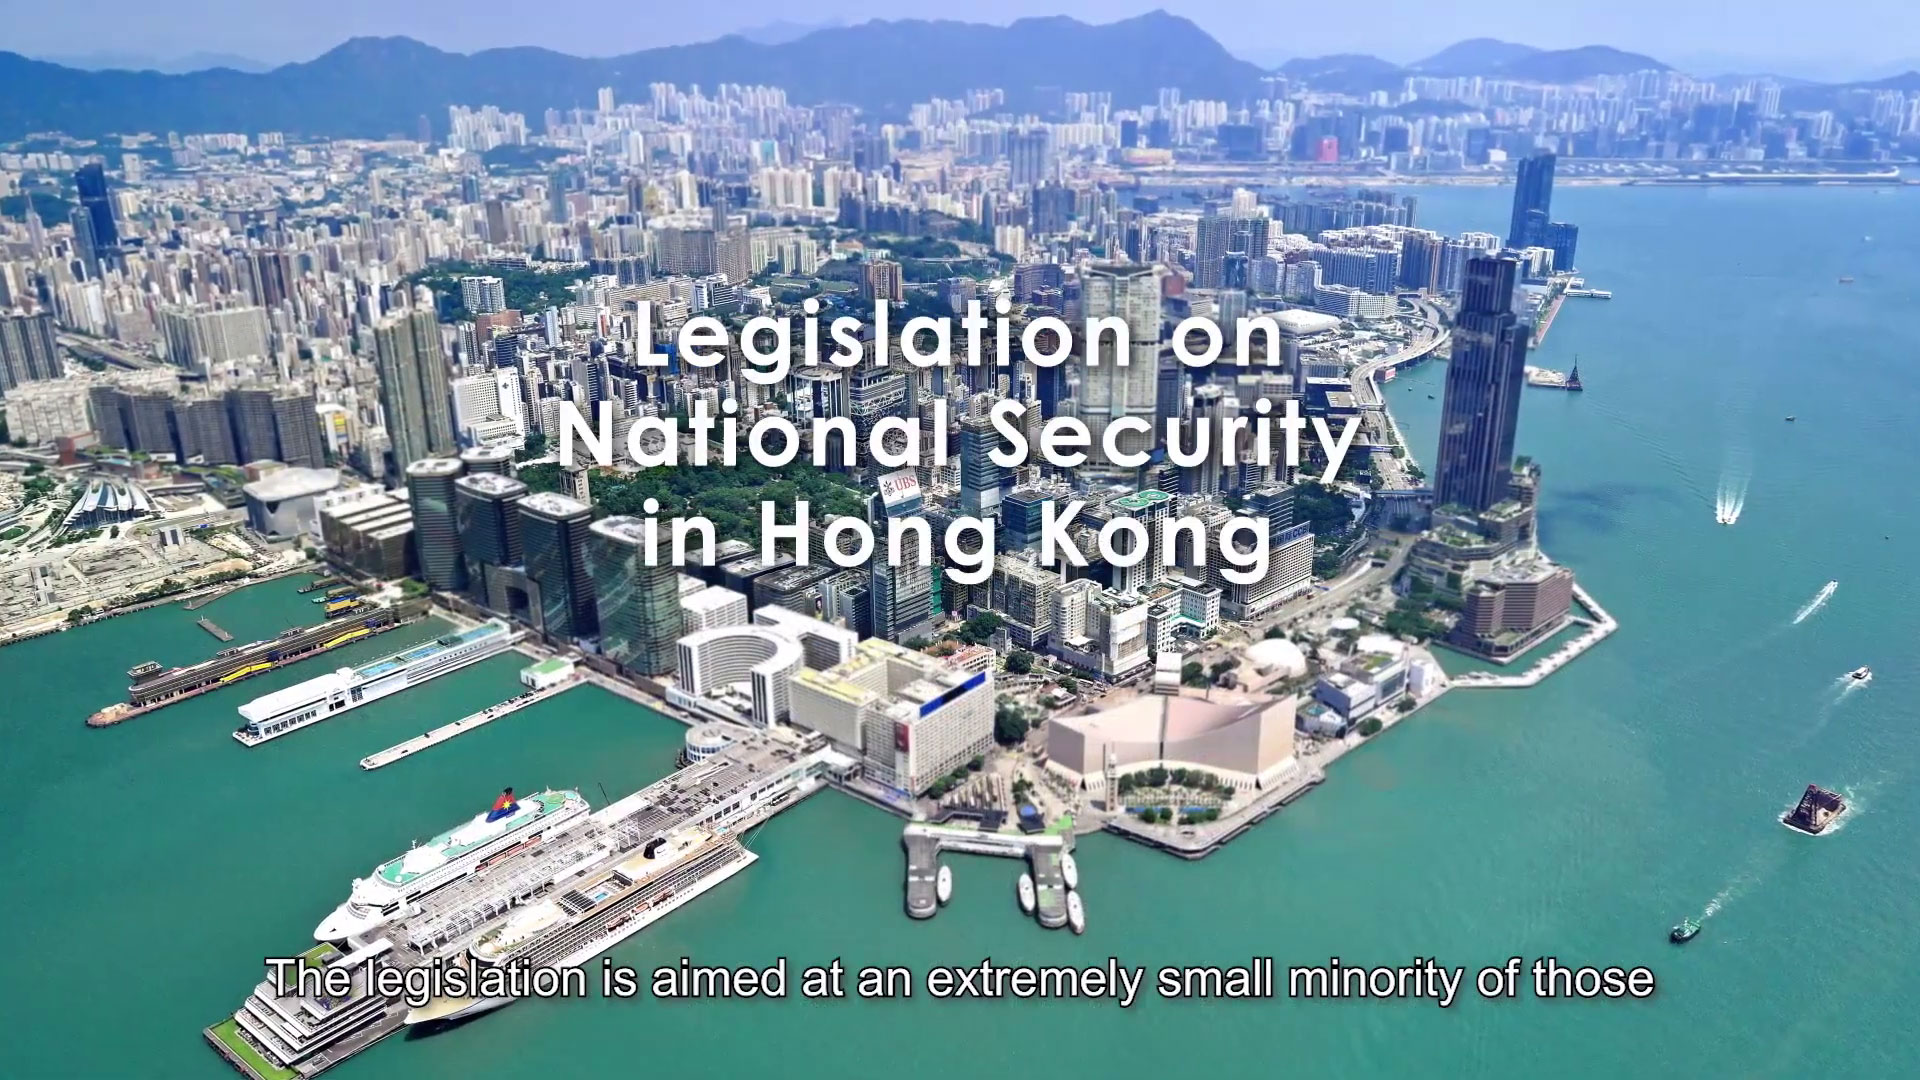 CE's remarks on national security legislation in Hong Kong